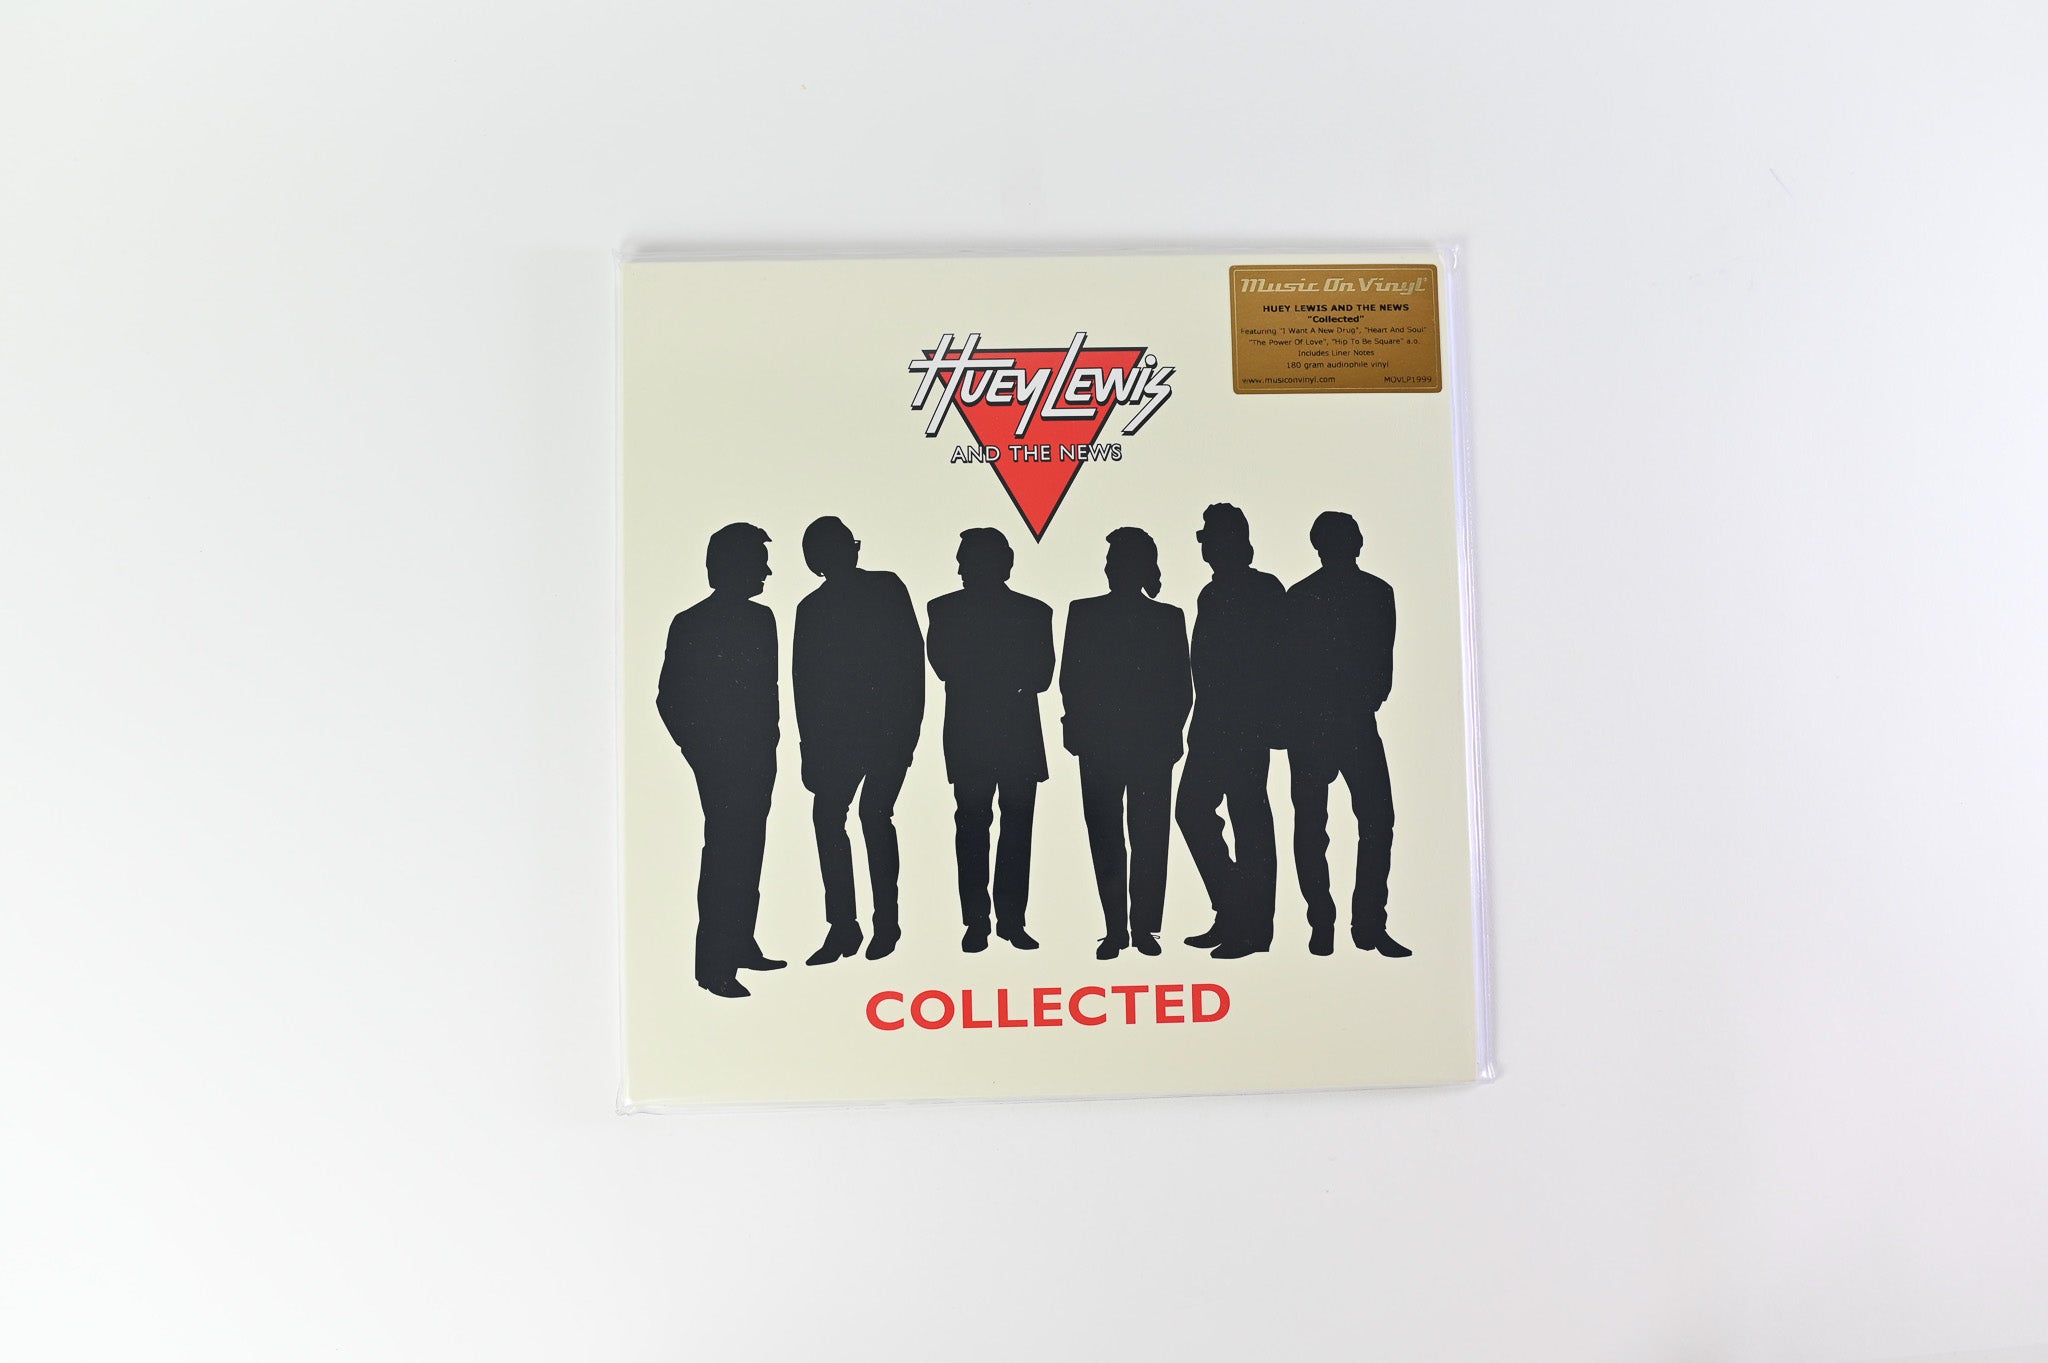 Huey Lewis & The News - Collected on Music On Vinyl